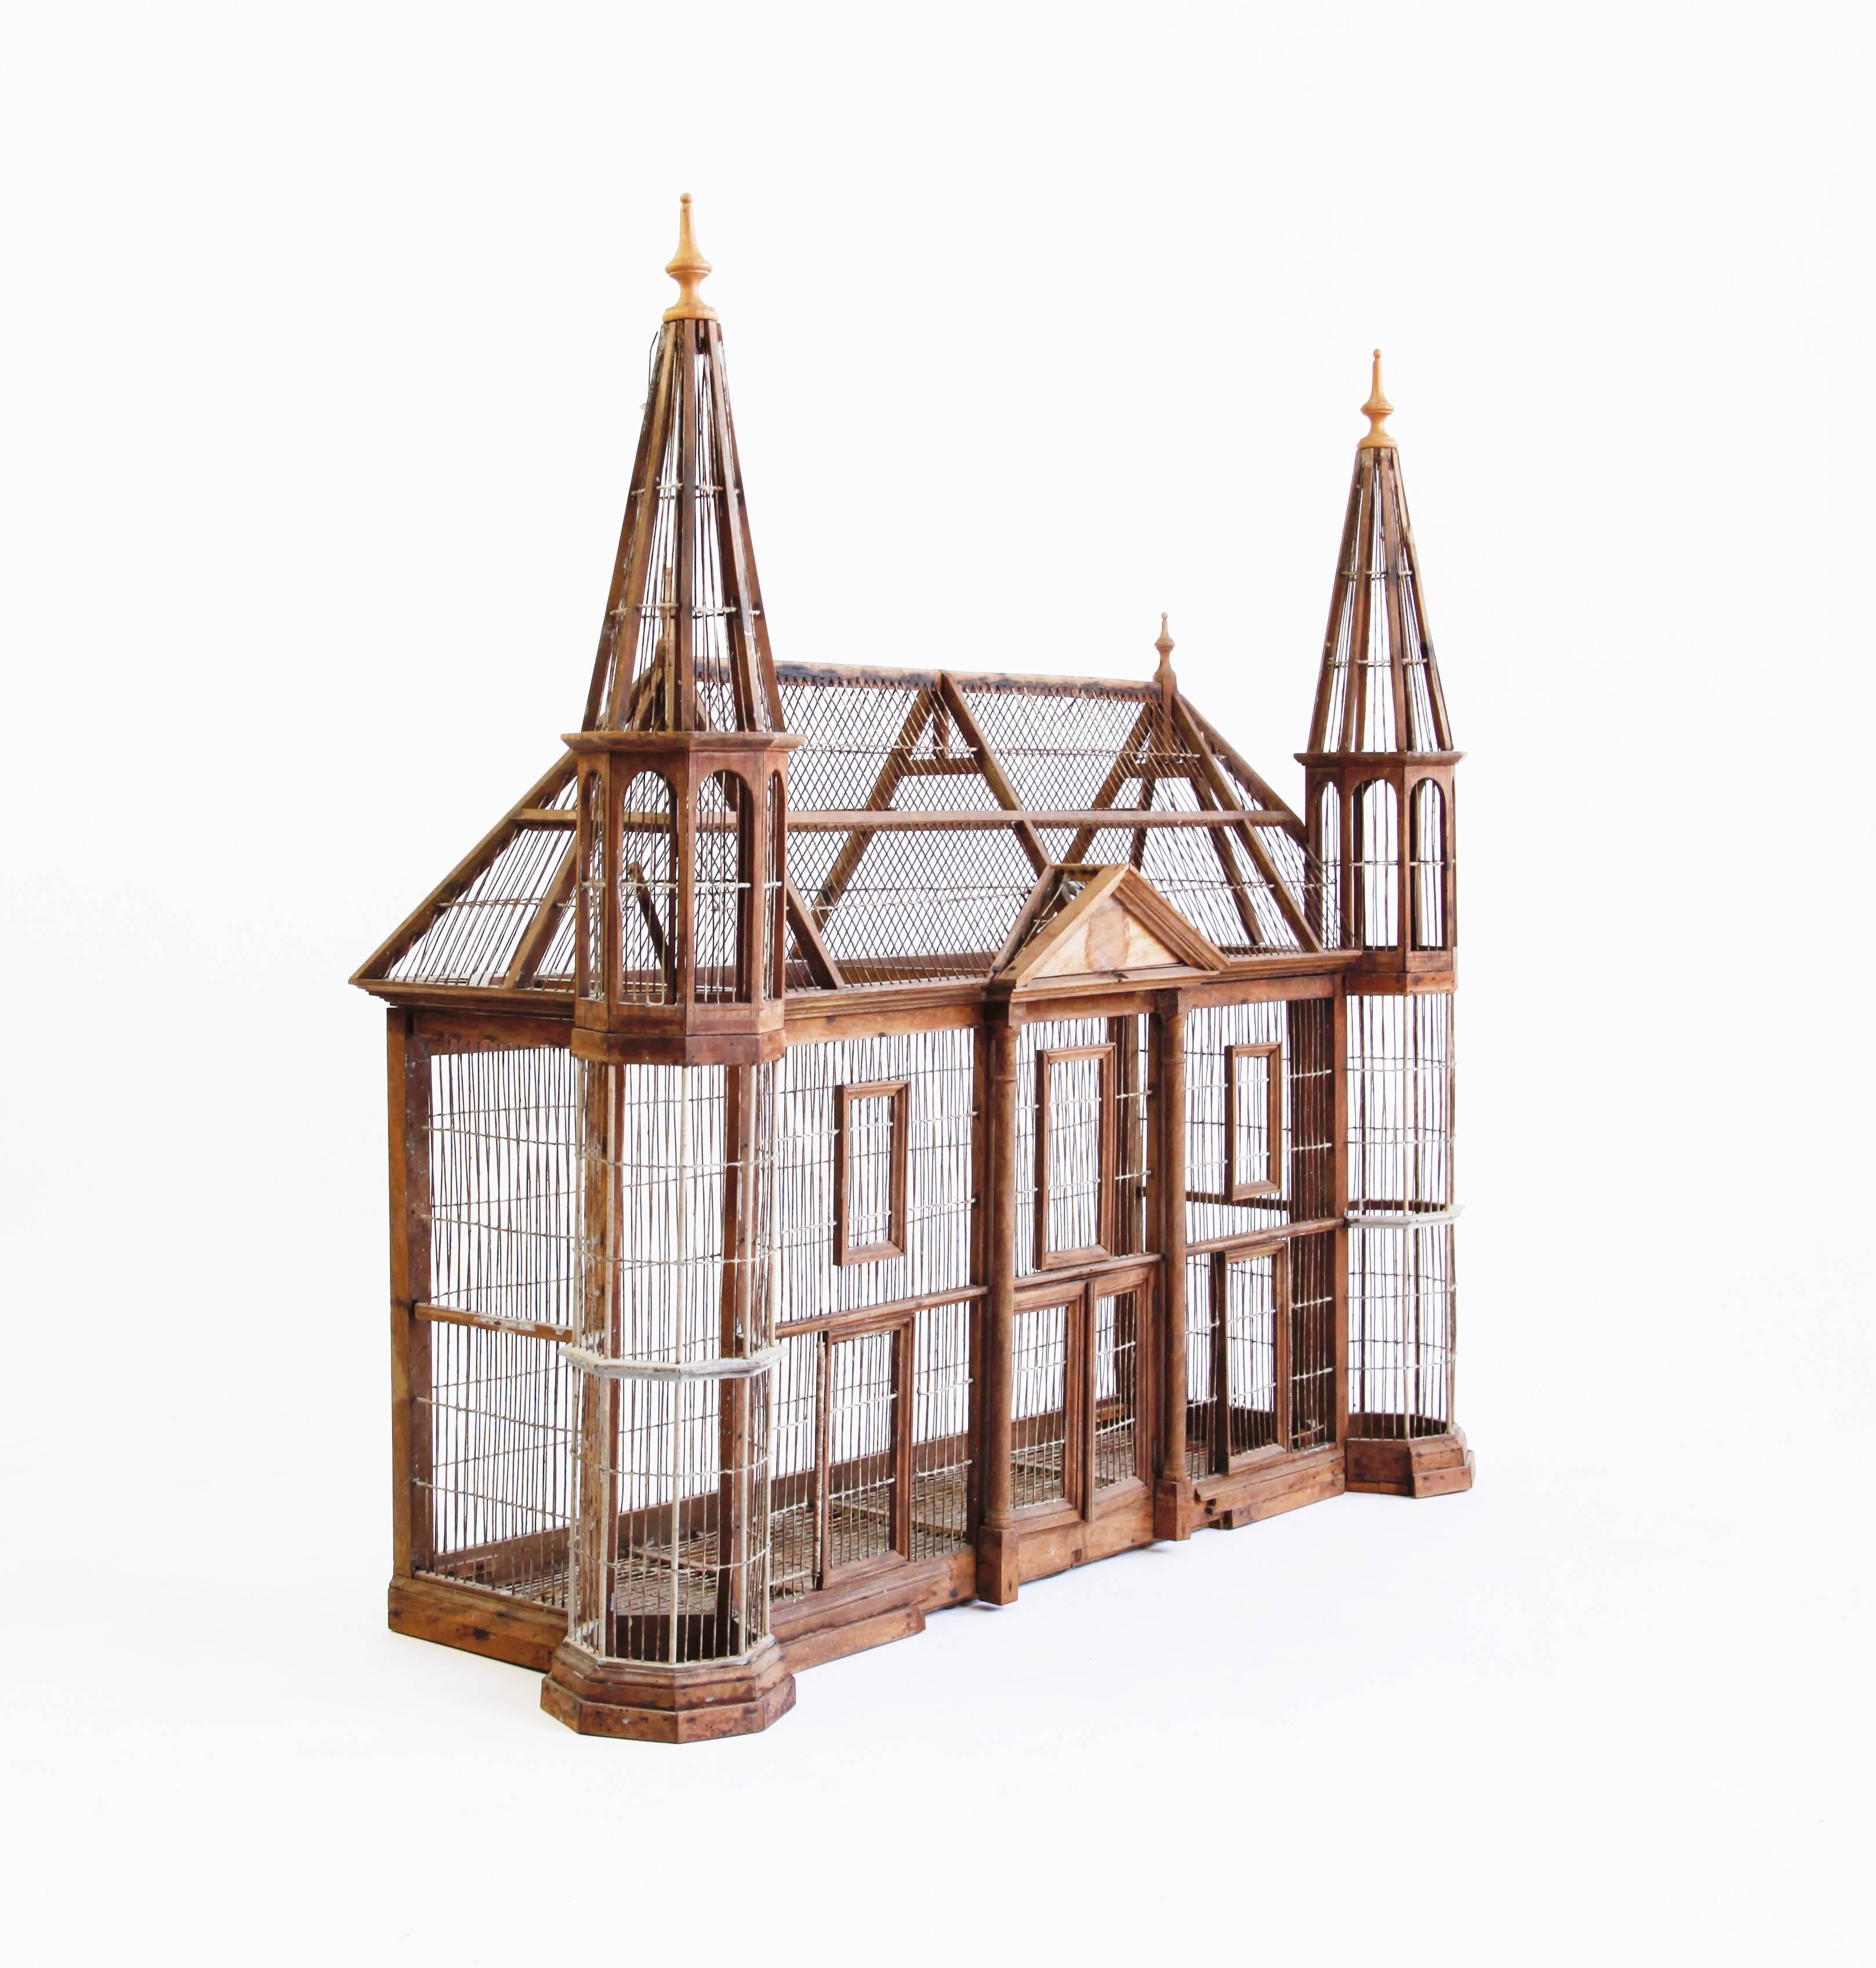 An extraordinary object. Constructed of wire, wood and a sheet metal tray, with the satisfying proportions of a Victorian manor house.